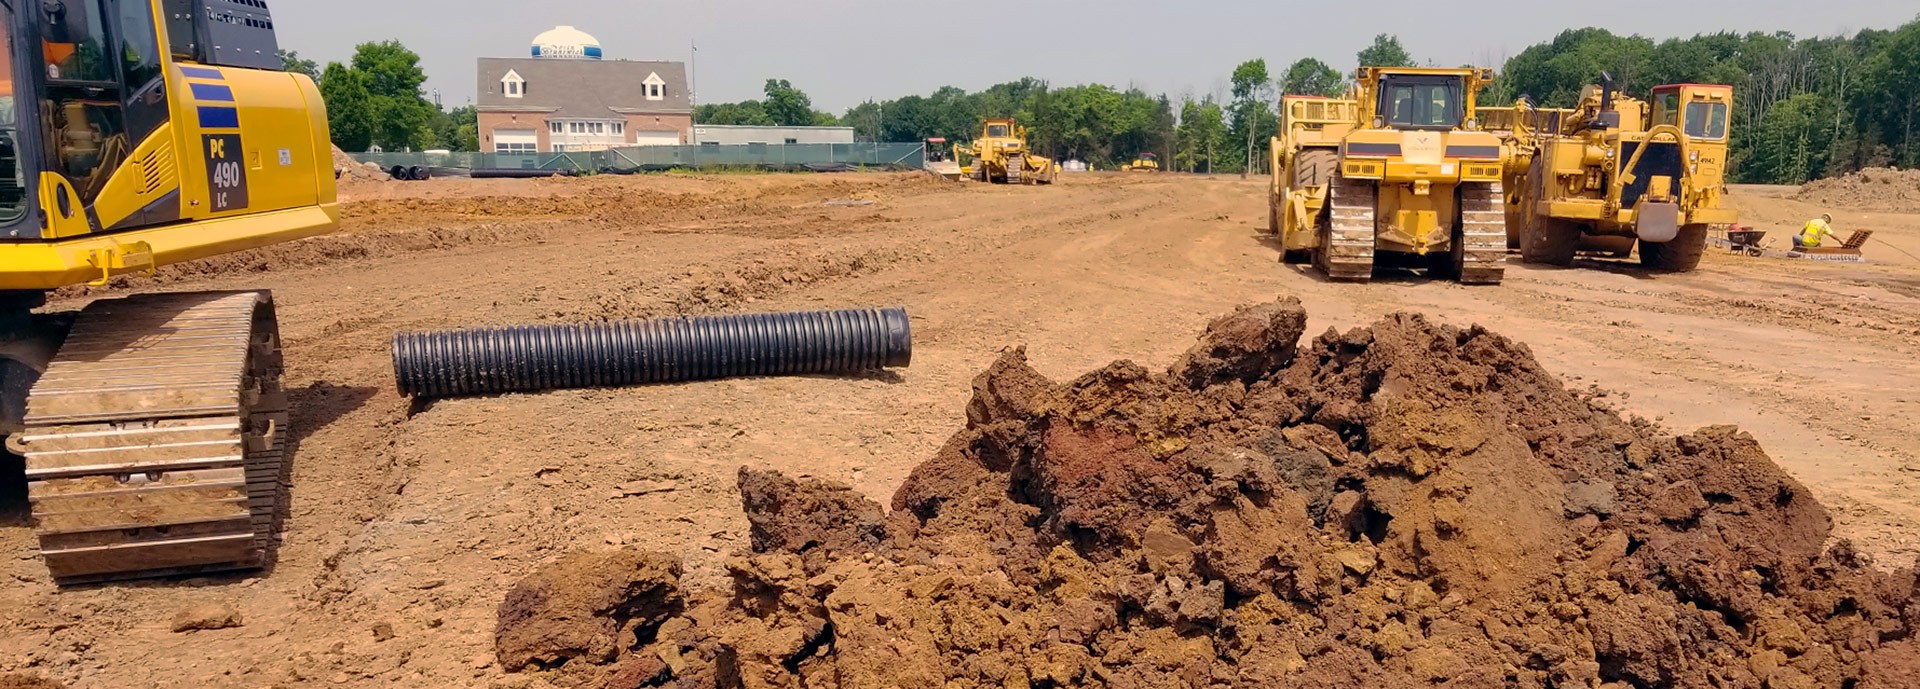 excavators around pile of dirt and pipe with buildings in distance